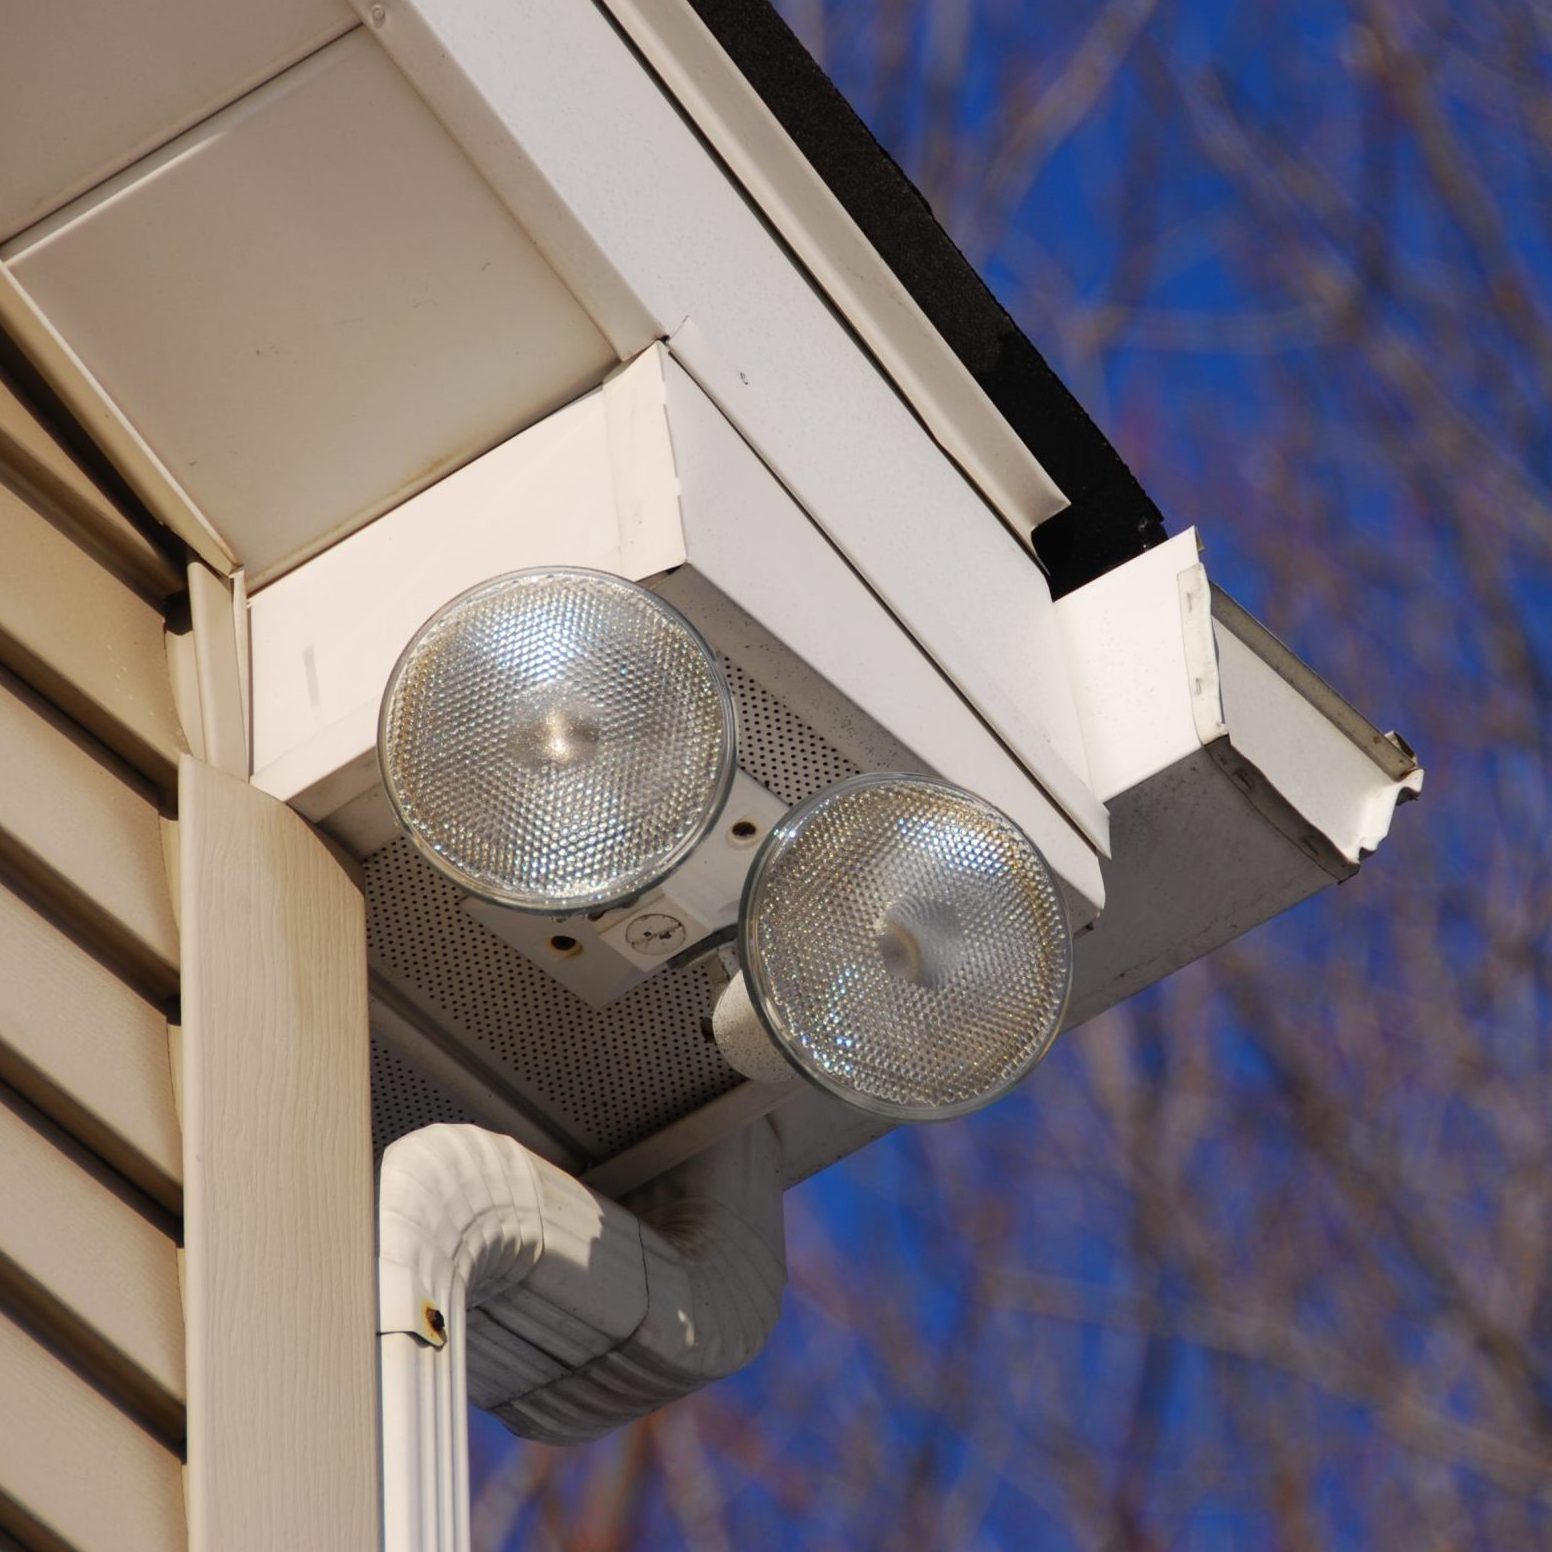 The 7 Best Outdoor Flood Lights for Home Security in 2022